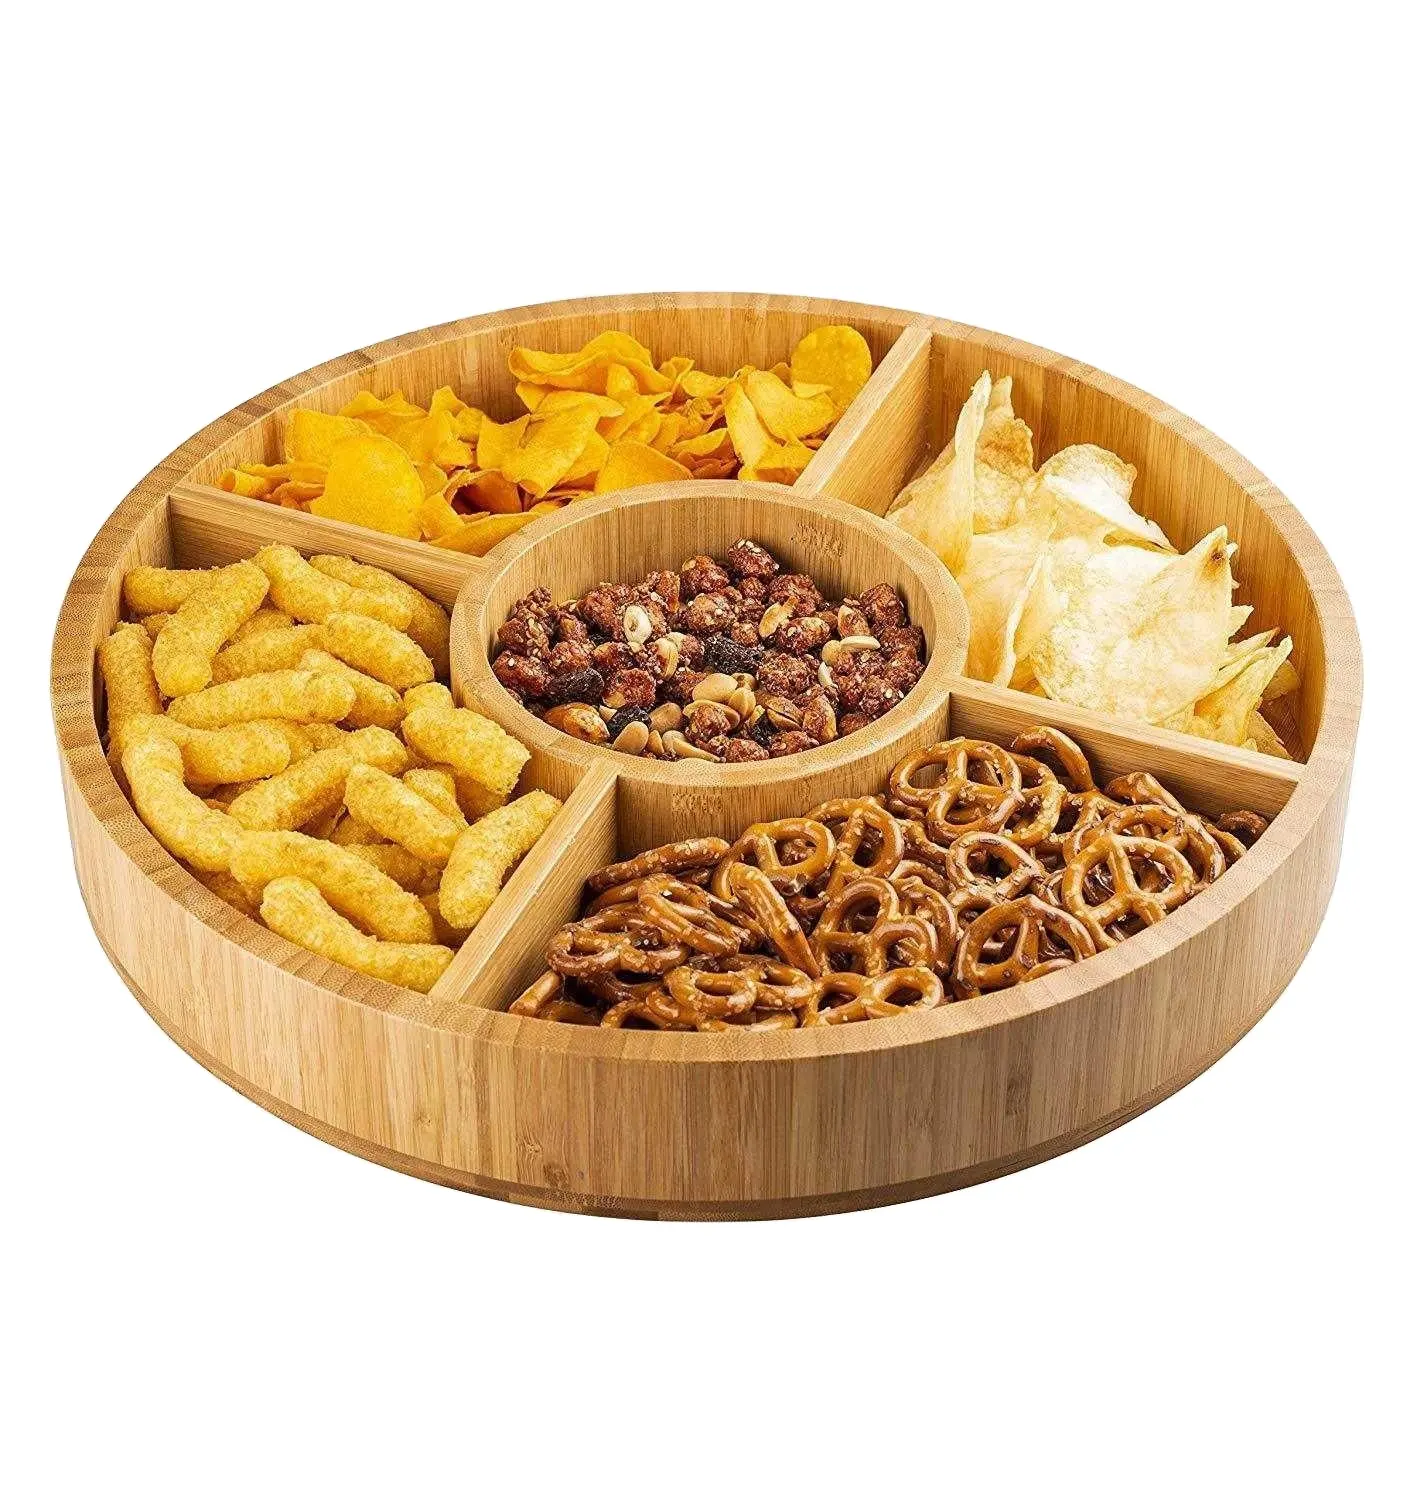 Lazy susan rotating wooden bamboo wood taco servers round appetizer snack platter serving tray with divider section